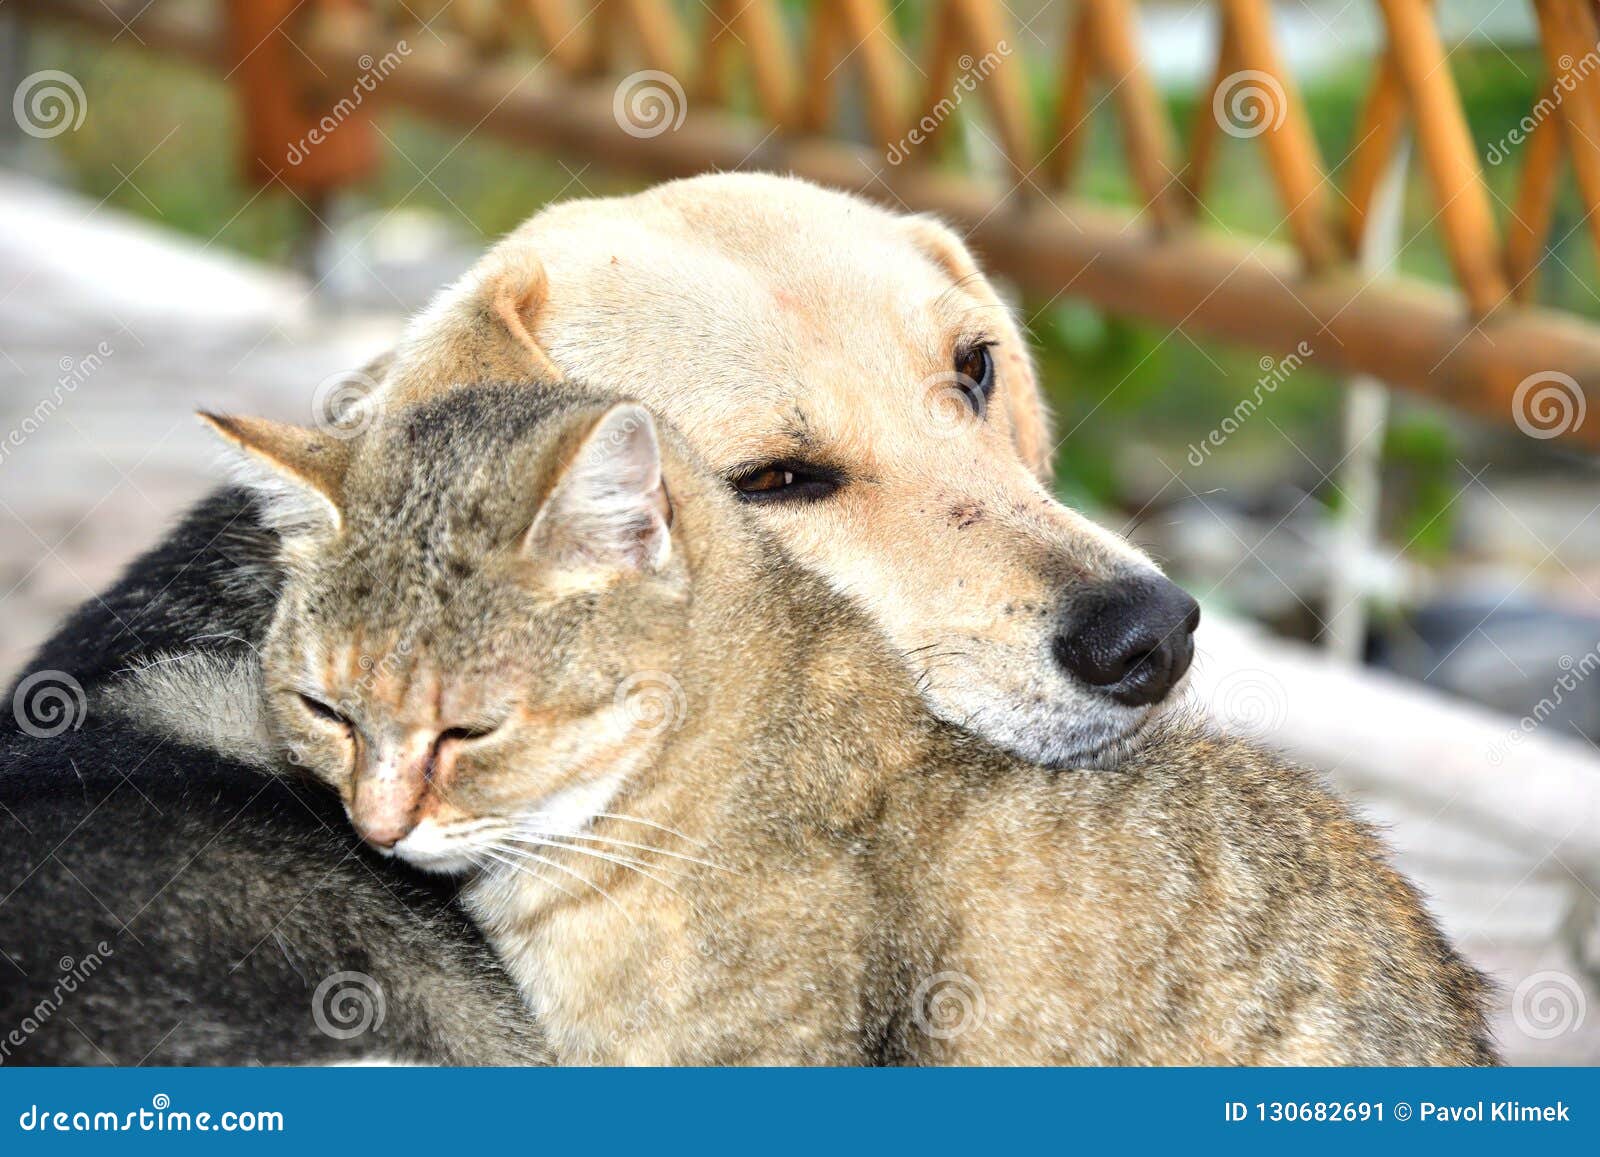 431,199 Animal Love Stock Photos - Free & Royalty-Free Stock Photos from  Dreamstime